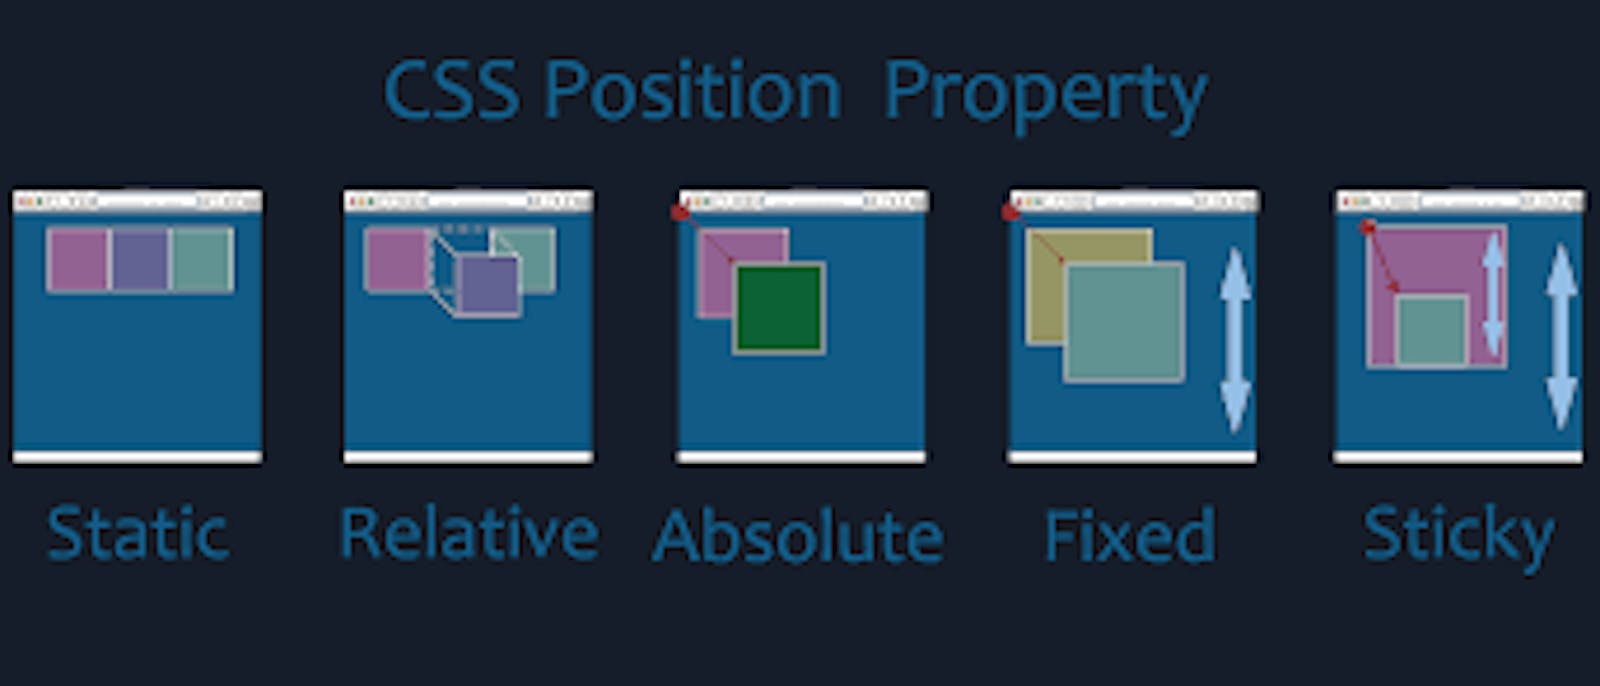 Positioning in CSS